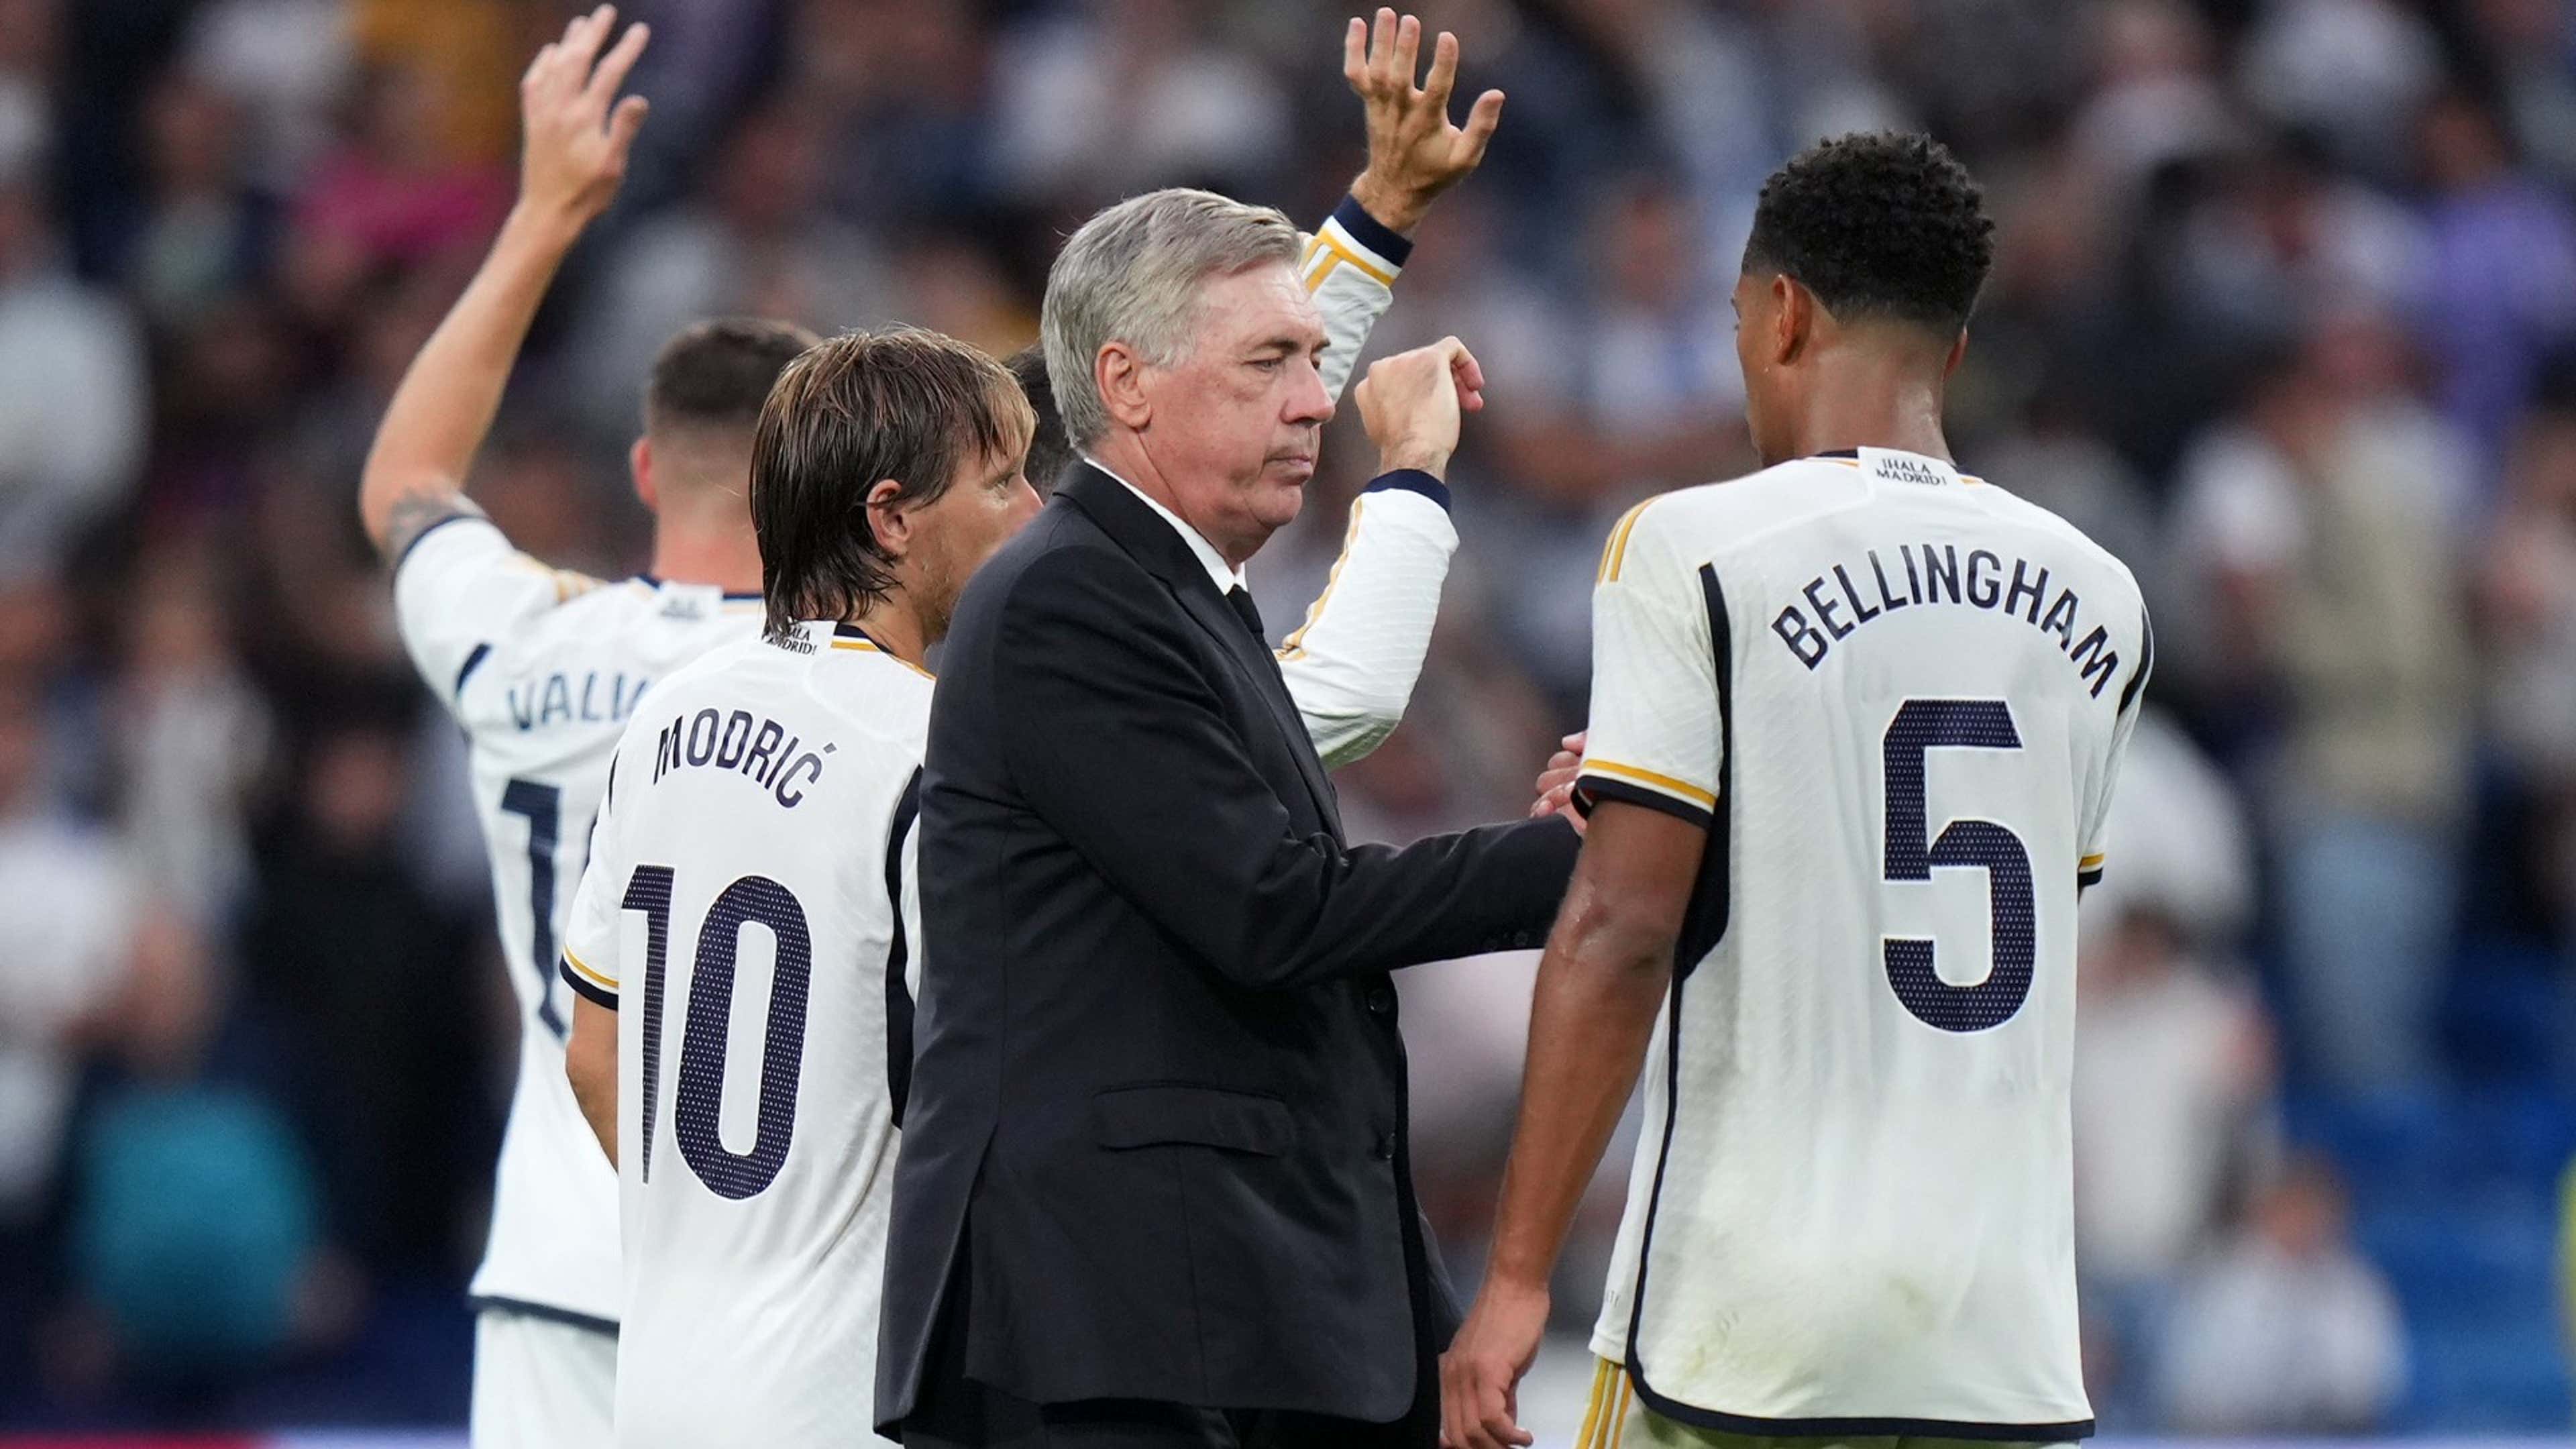 Carlo Ancelotti, Head Coach of Real Madrid, shakes hands with Jude Bellingham